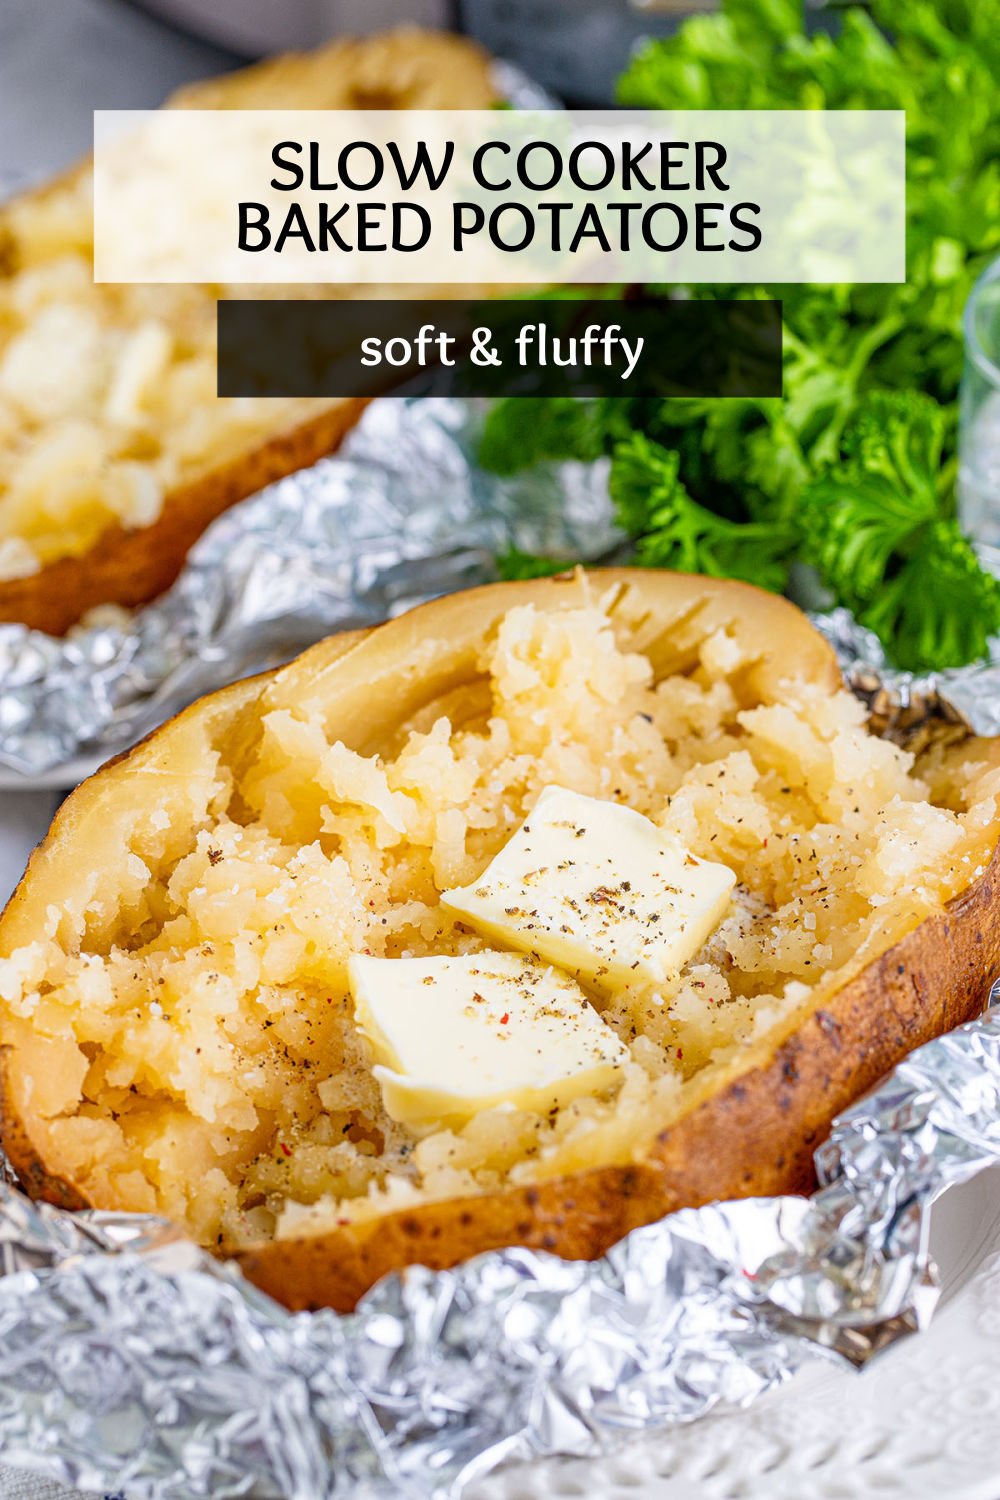 Slow cooked baked potatoes infused with olive oil, kosher salt, and pepper. They're soft, tender, and melt in your mouth delicious! Get a restaurant-quality baked potato at home in your crockpot! Enjoy them as-is or with your favorite toppings. | www.persnicketyplates.com